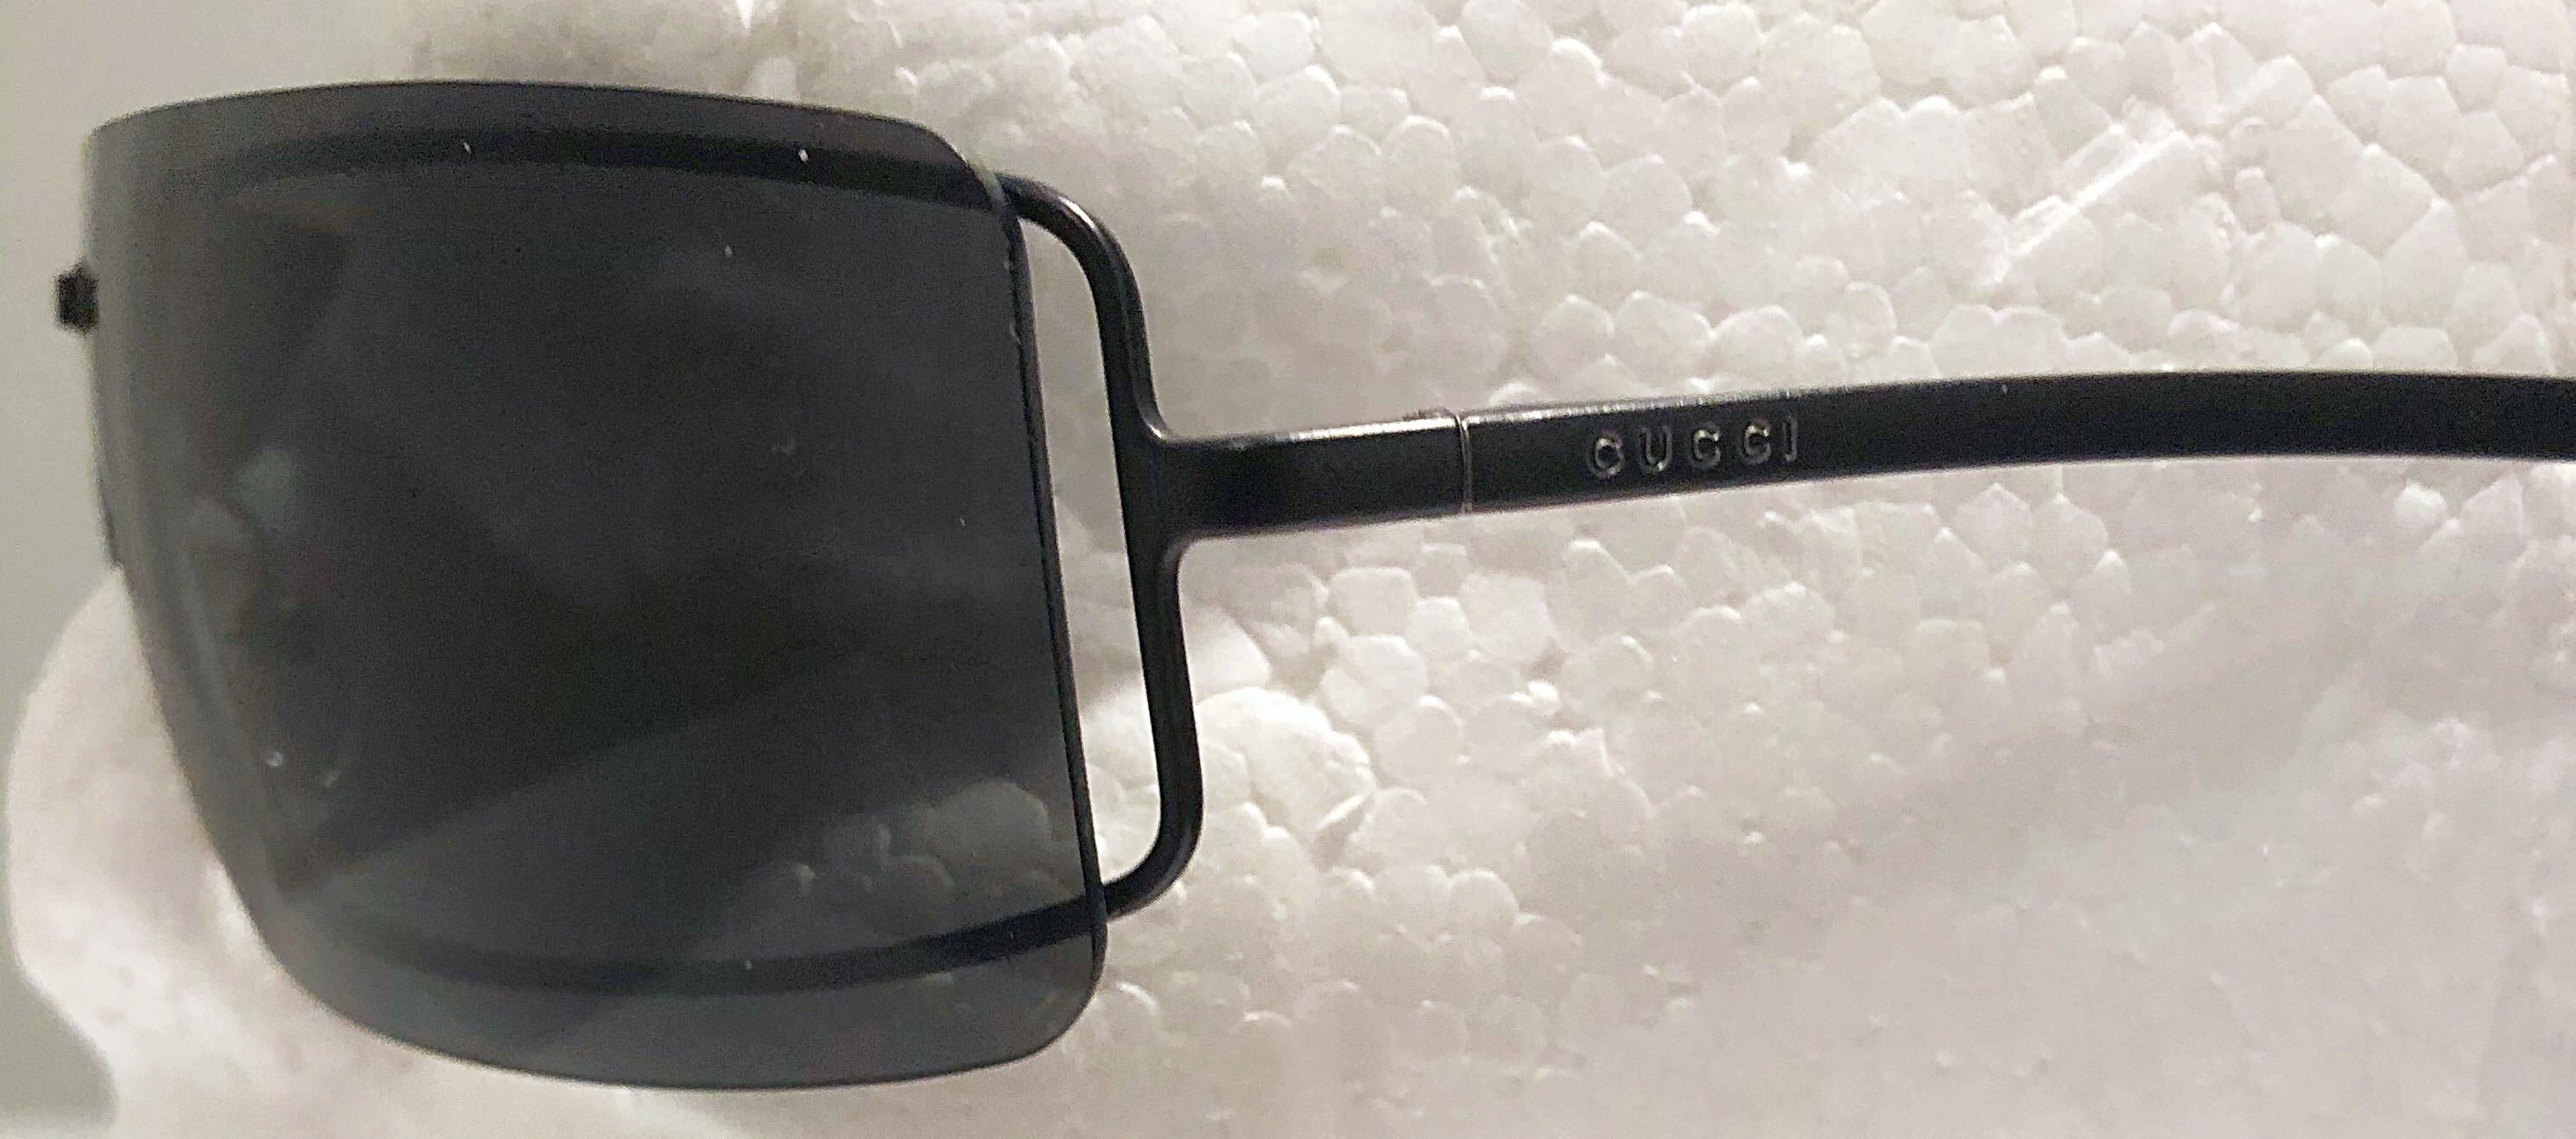 Gucci by Tom Ford Matrix Black Grey Rimless Unisex 1990s Vintage 90s Sunglasses For Sale 9